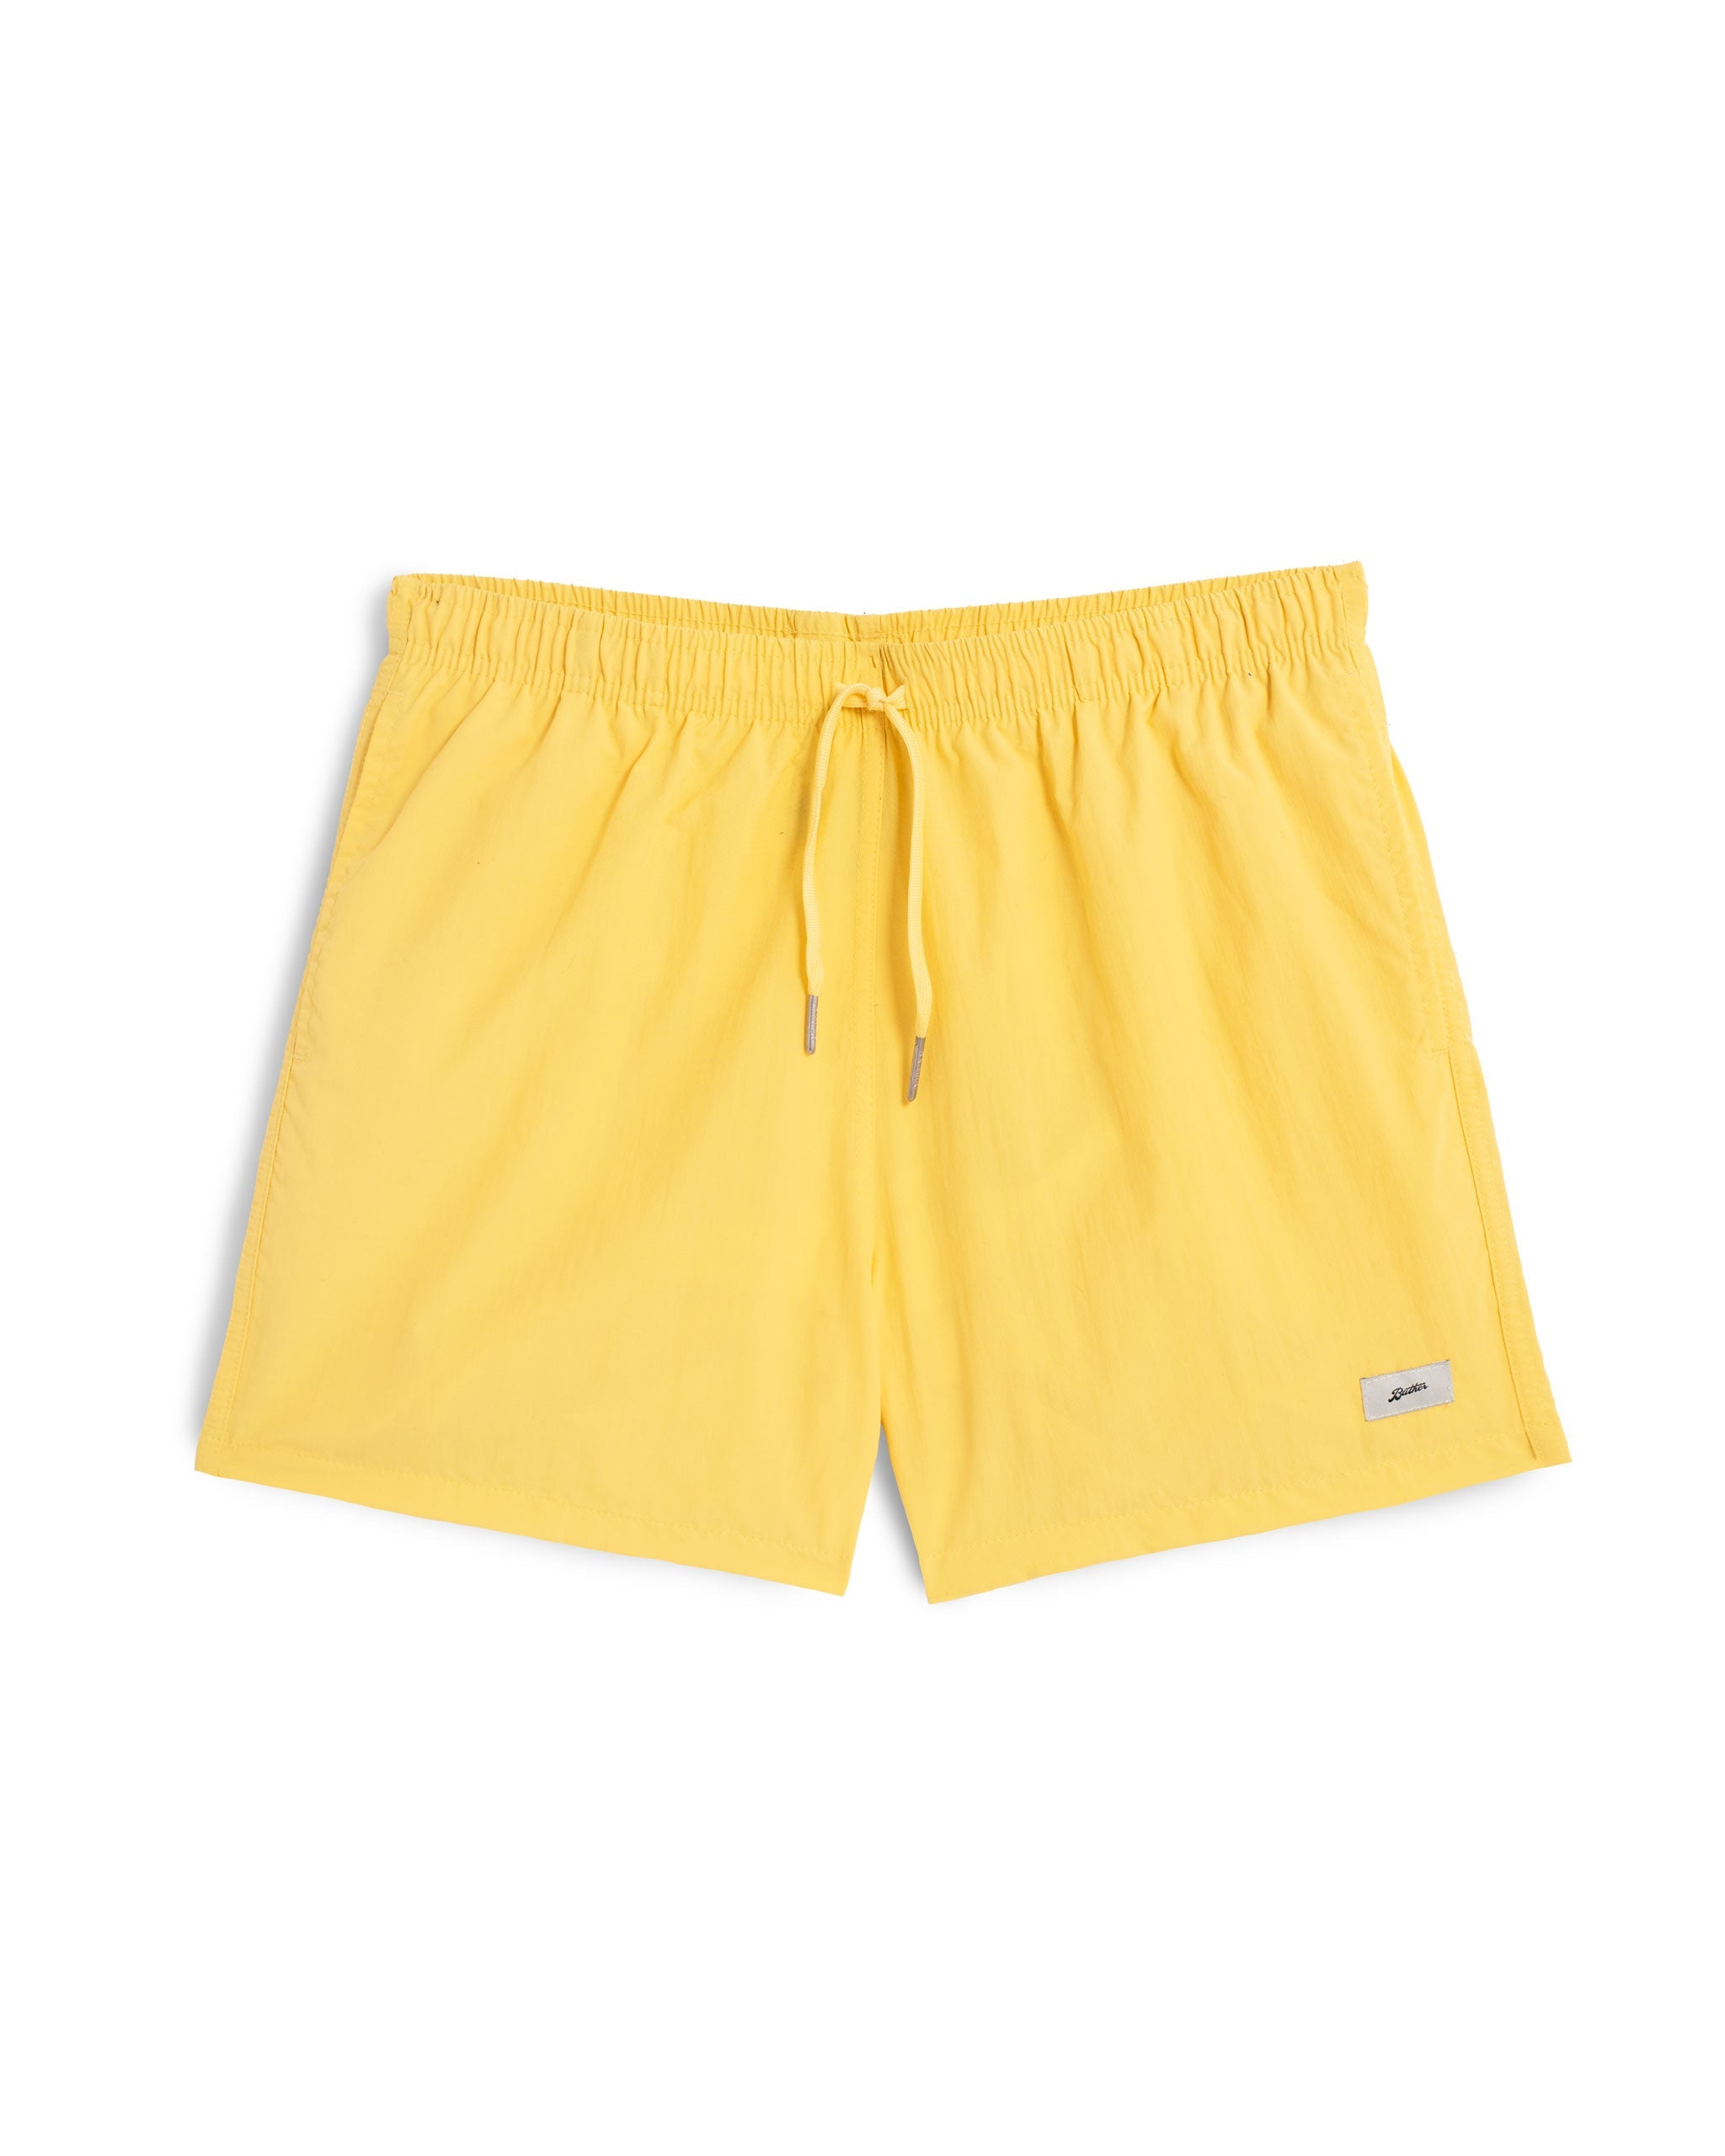 A solid yellow swim trunk in canary yellow with a matching drawstring